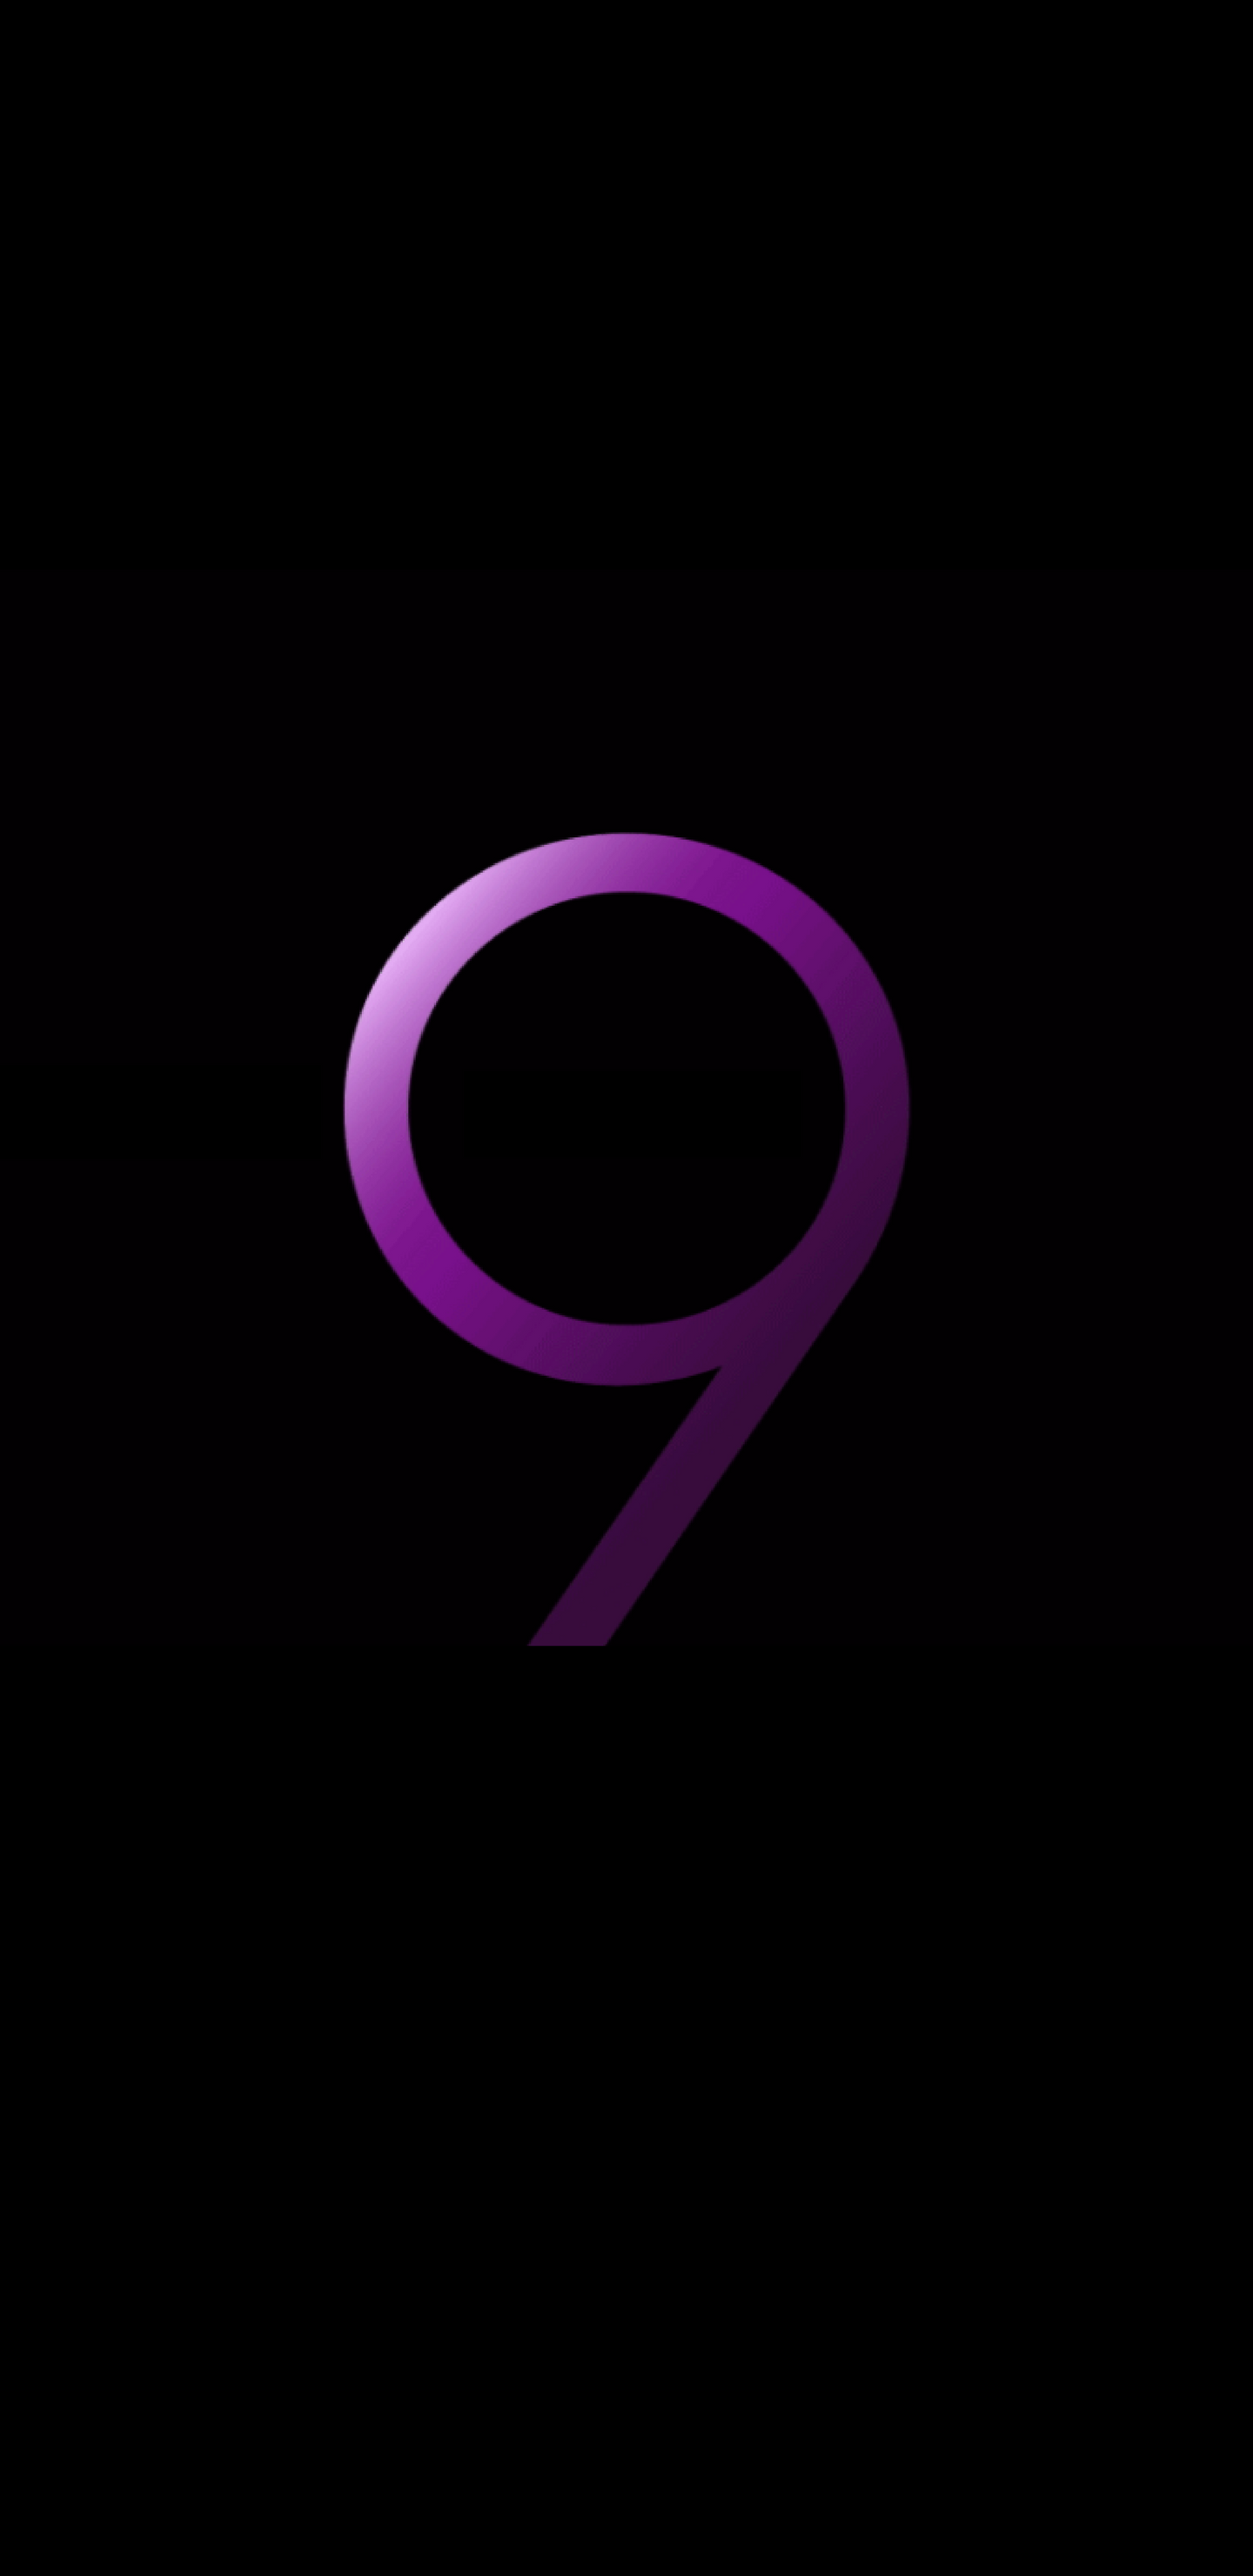 Download Samsung Galaxy S9 Official Stock Wallpapers Full Hd HD Wallpapers Download Free Images Wallpaper [wallpaper981.blogspot.com]